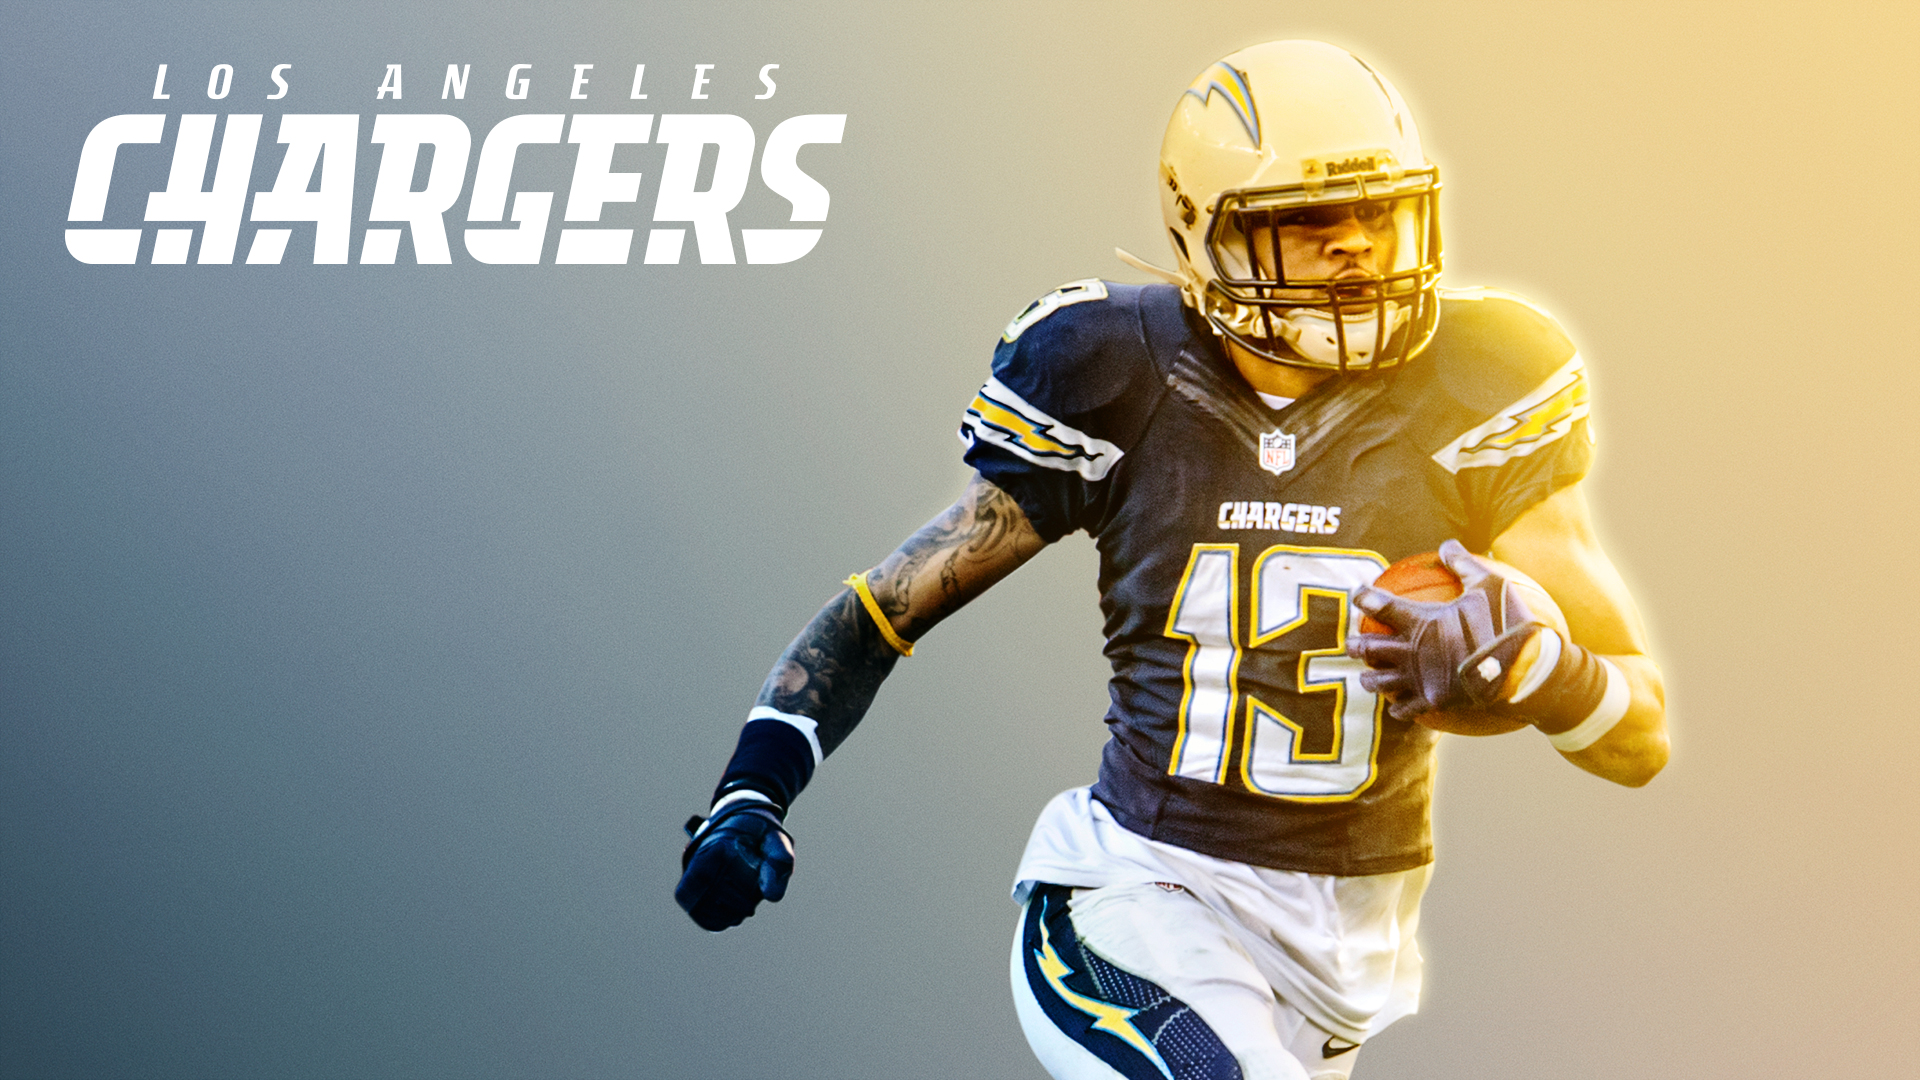 Los Angeles Chargers Wallpaper Free Los Angeles Chargers